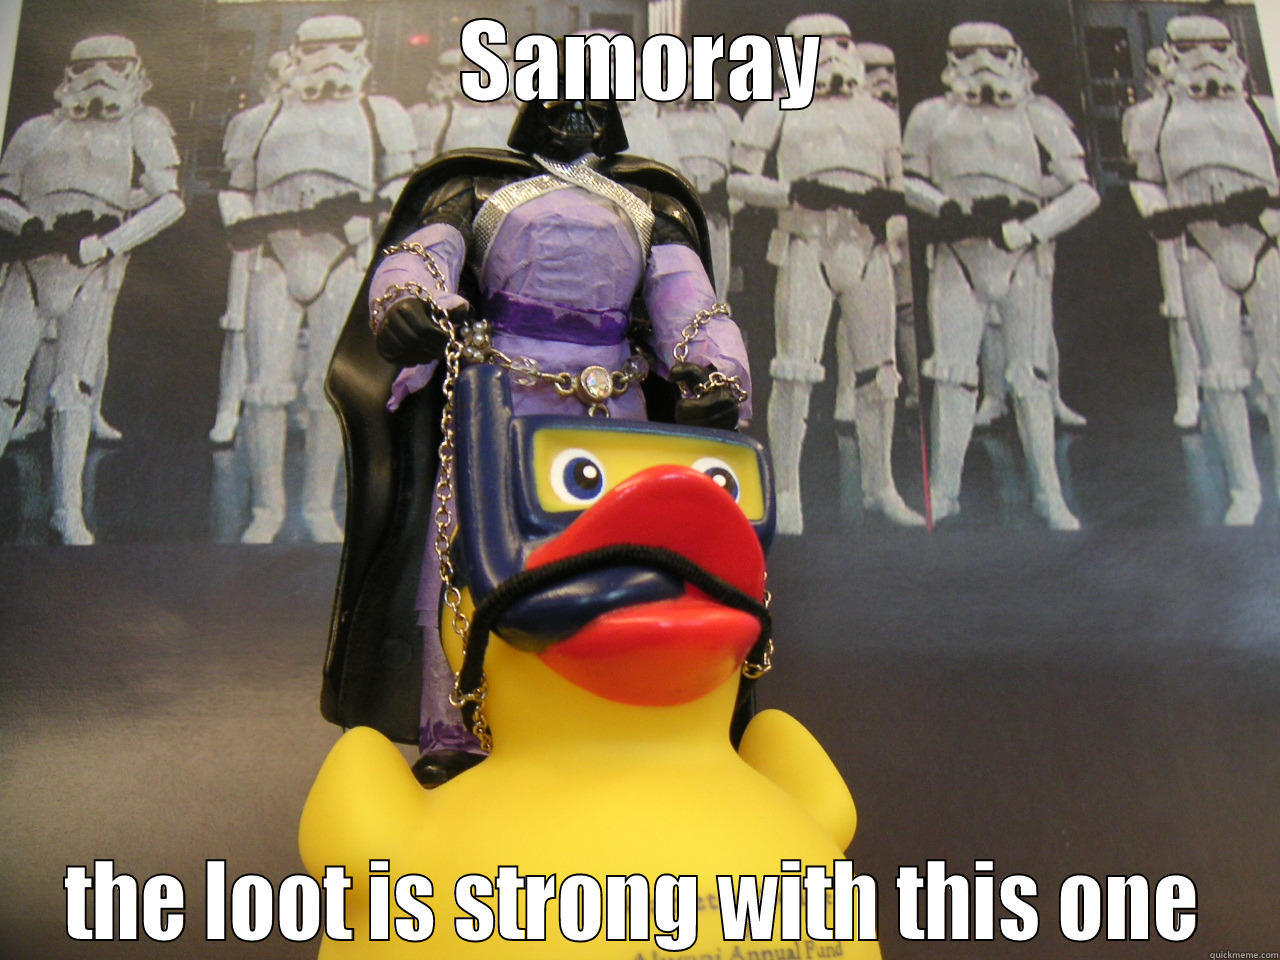 the loot is strong with this one - 	SAMORAY THE LOOT IS STRONG WITH THIS ONE Misc